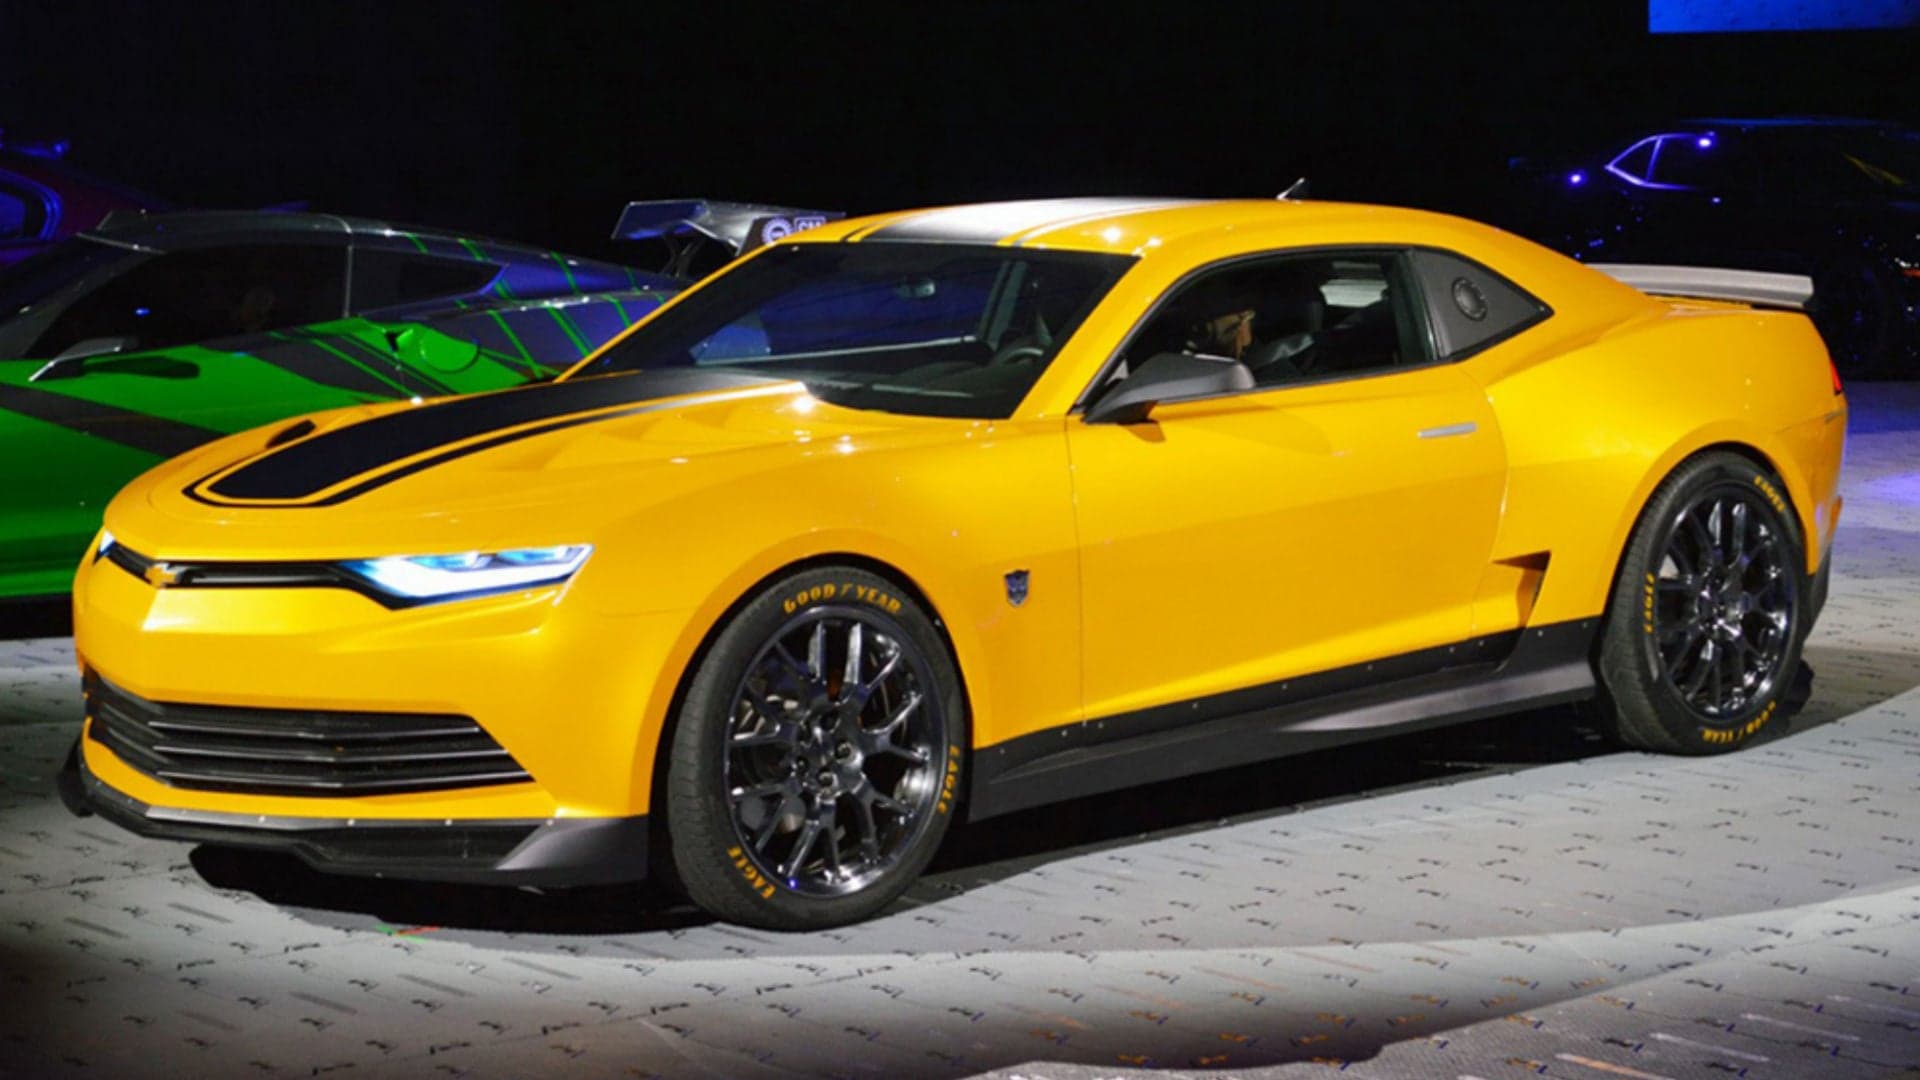 Collection of ‘Bumblebee’ Chevrolet Camaros From Transformers Series Heads to Auction